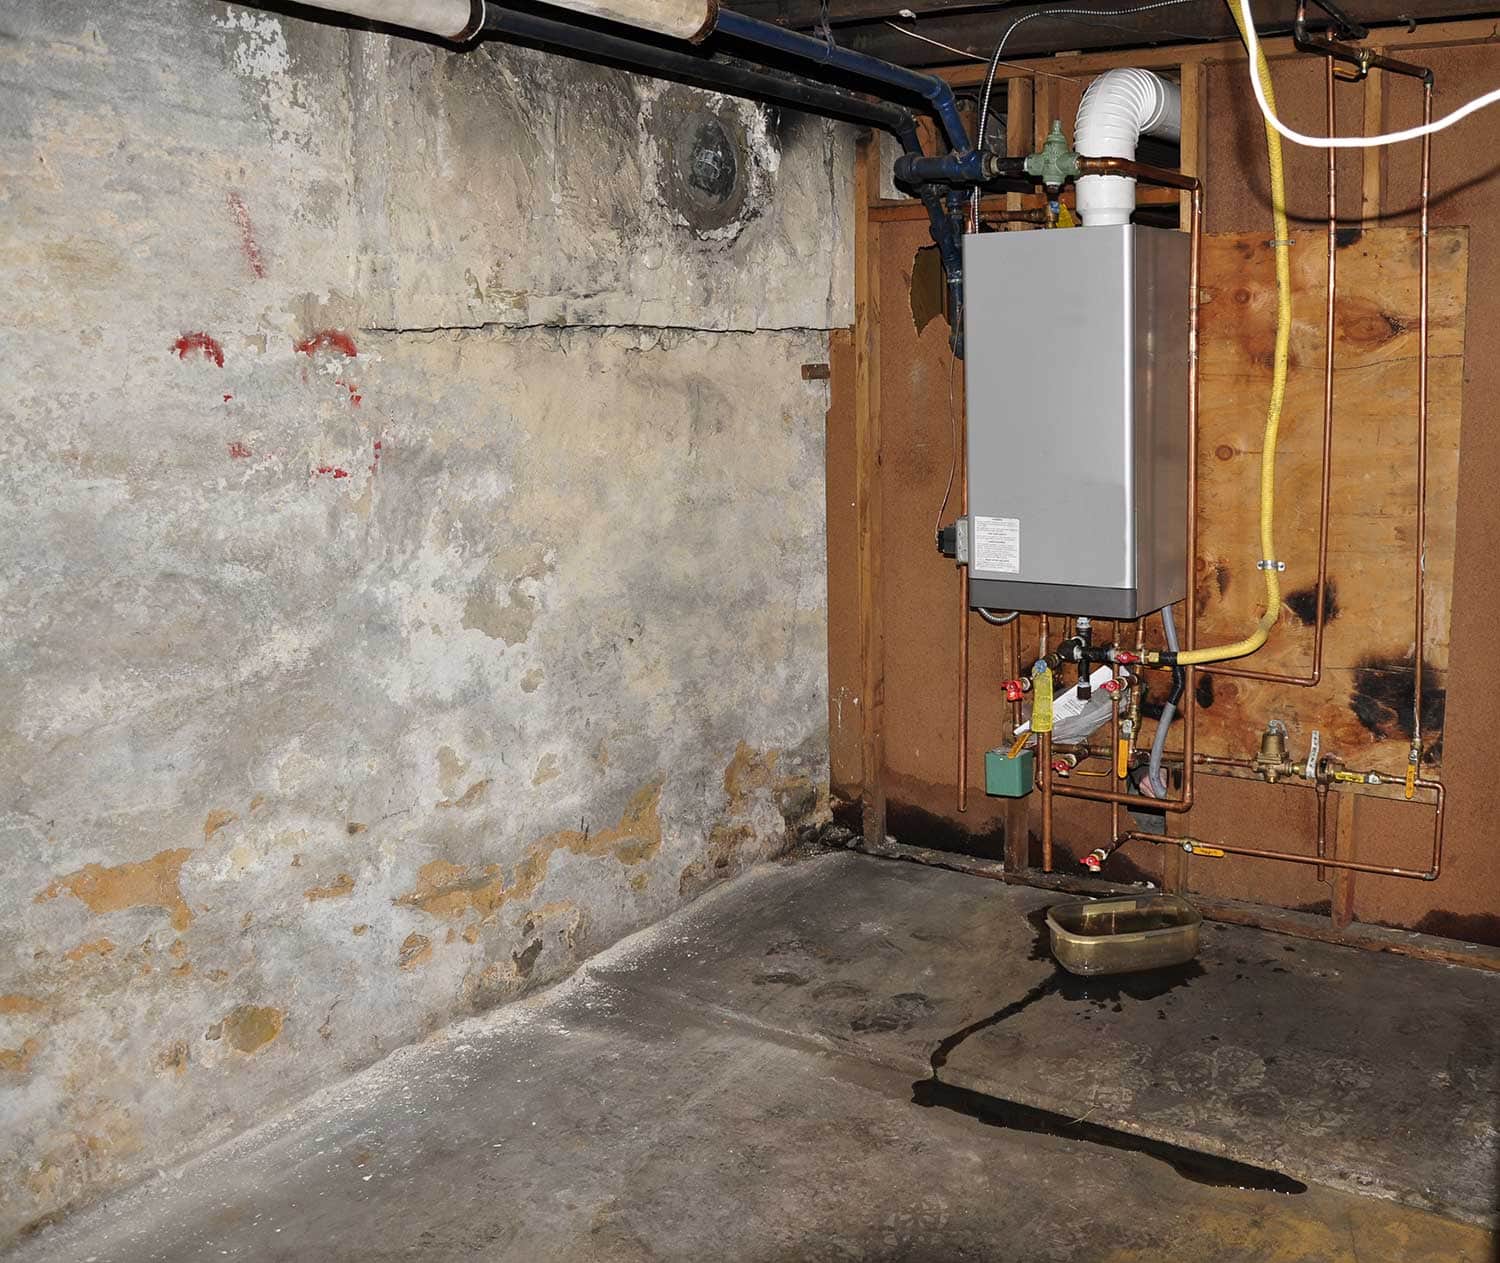 Furnace heating unit on wall in an old basement